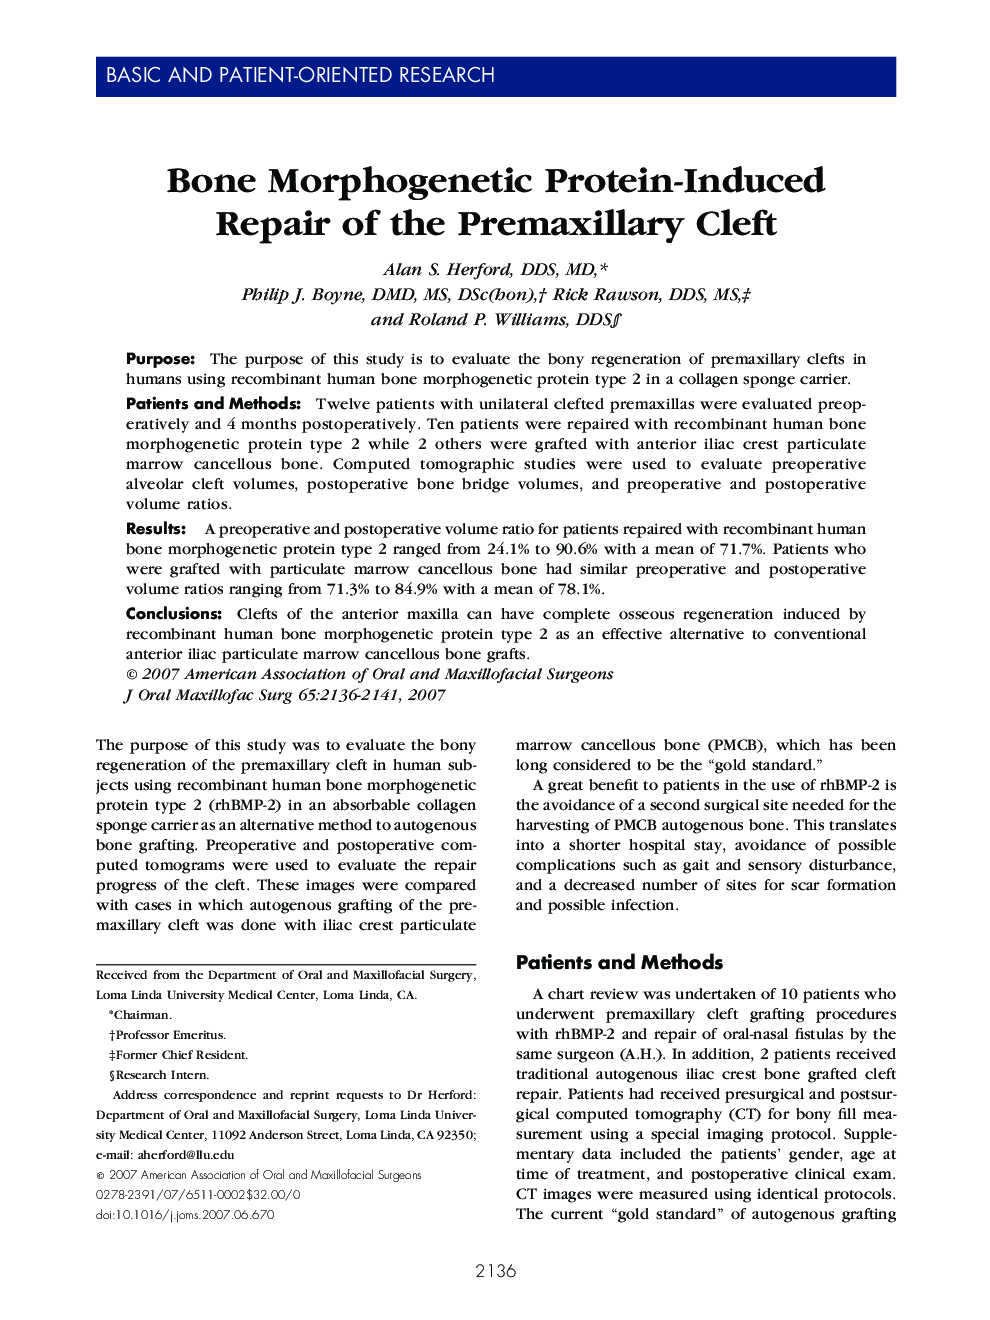 Bone Morphogenetic Protein-Induced Repair of the Premaxillary Cleft